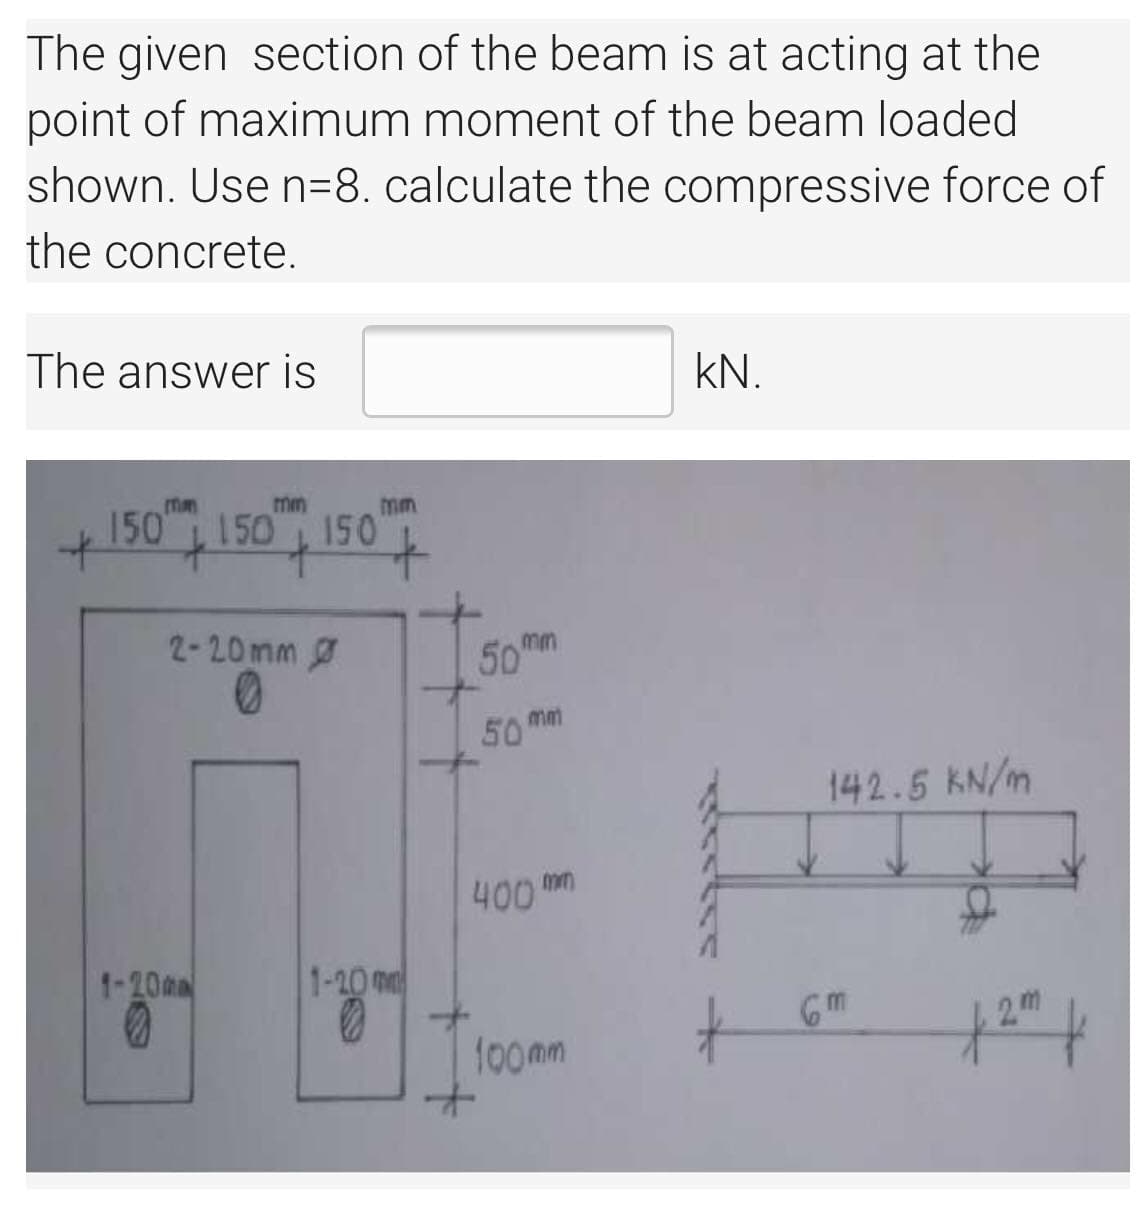 The given section of the beam is at acting at the
point of maximum moment of the beam loaded
shown. Use n=8. calculate the compressive force of
the concrete.
The answer is
kN.
mm
mm
150 150 150
mm
2-20mm
50mm
50 mm
142.5 KN/m
400 m
1-20m
1-20 m
Gm
2m
f00mm
